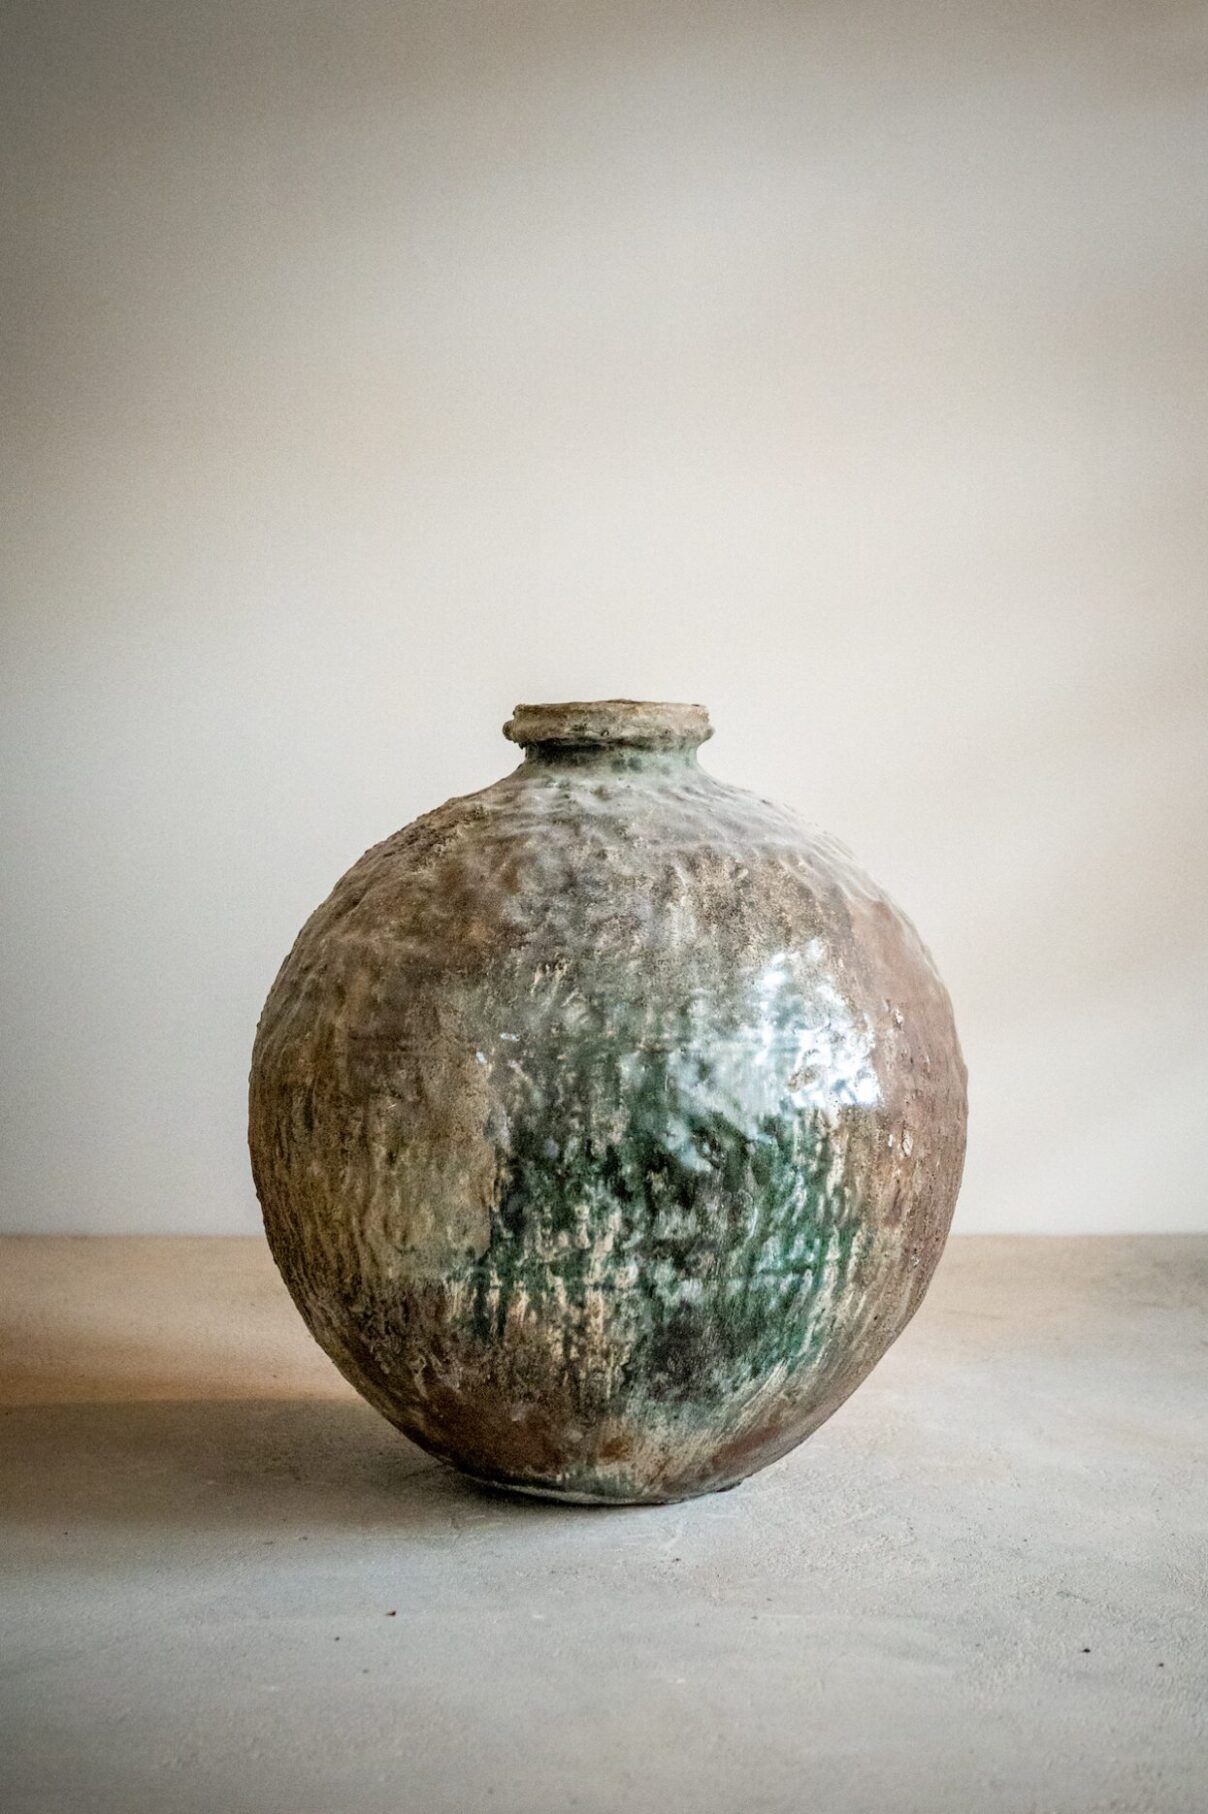 Zablocki masterfully plays with the illusion of drip glaze on his otherwise smooth-surfaced works. This is all possible thanks to his unique use of wood ash.